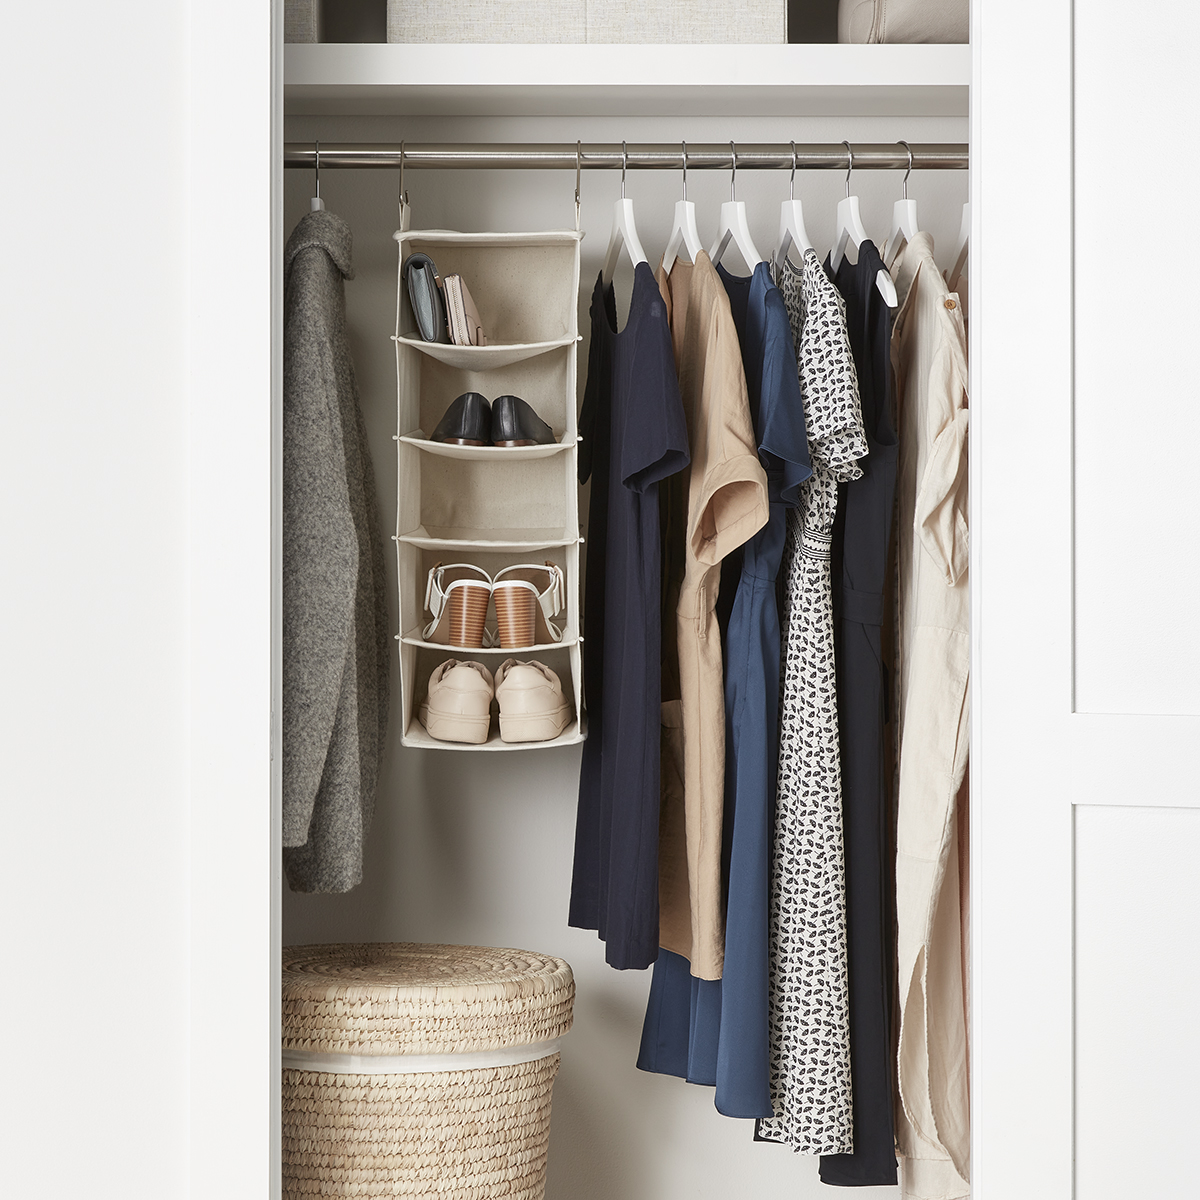 https://www.containerstore.com/catalogimages/471875/10085775-wide-5-compartment-hanging-.jpg